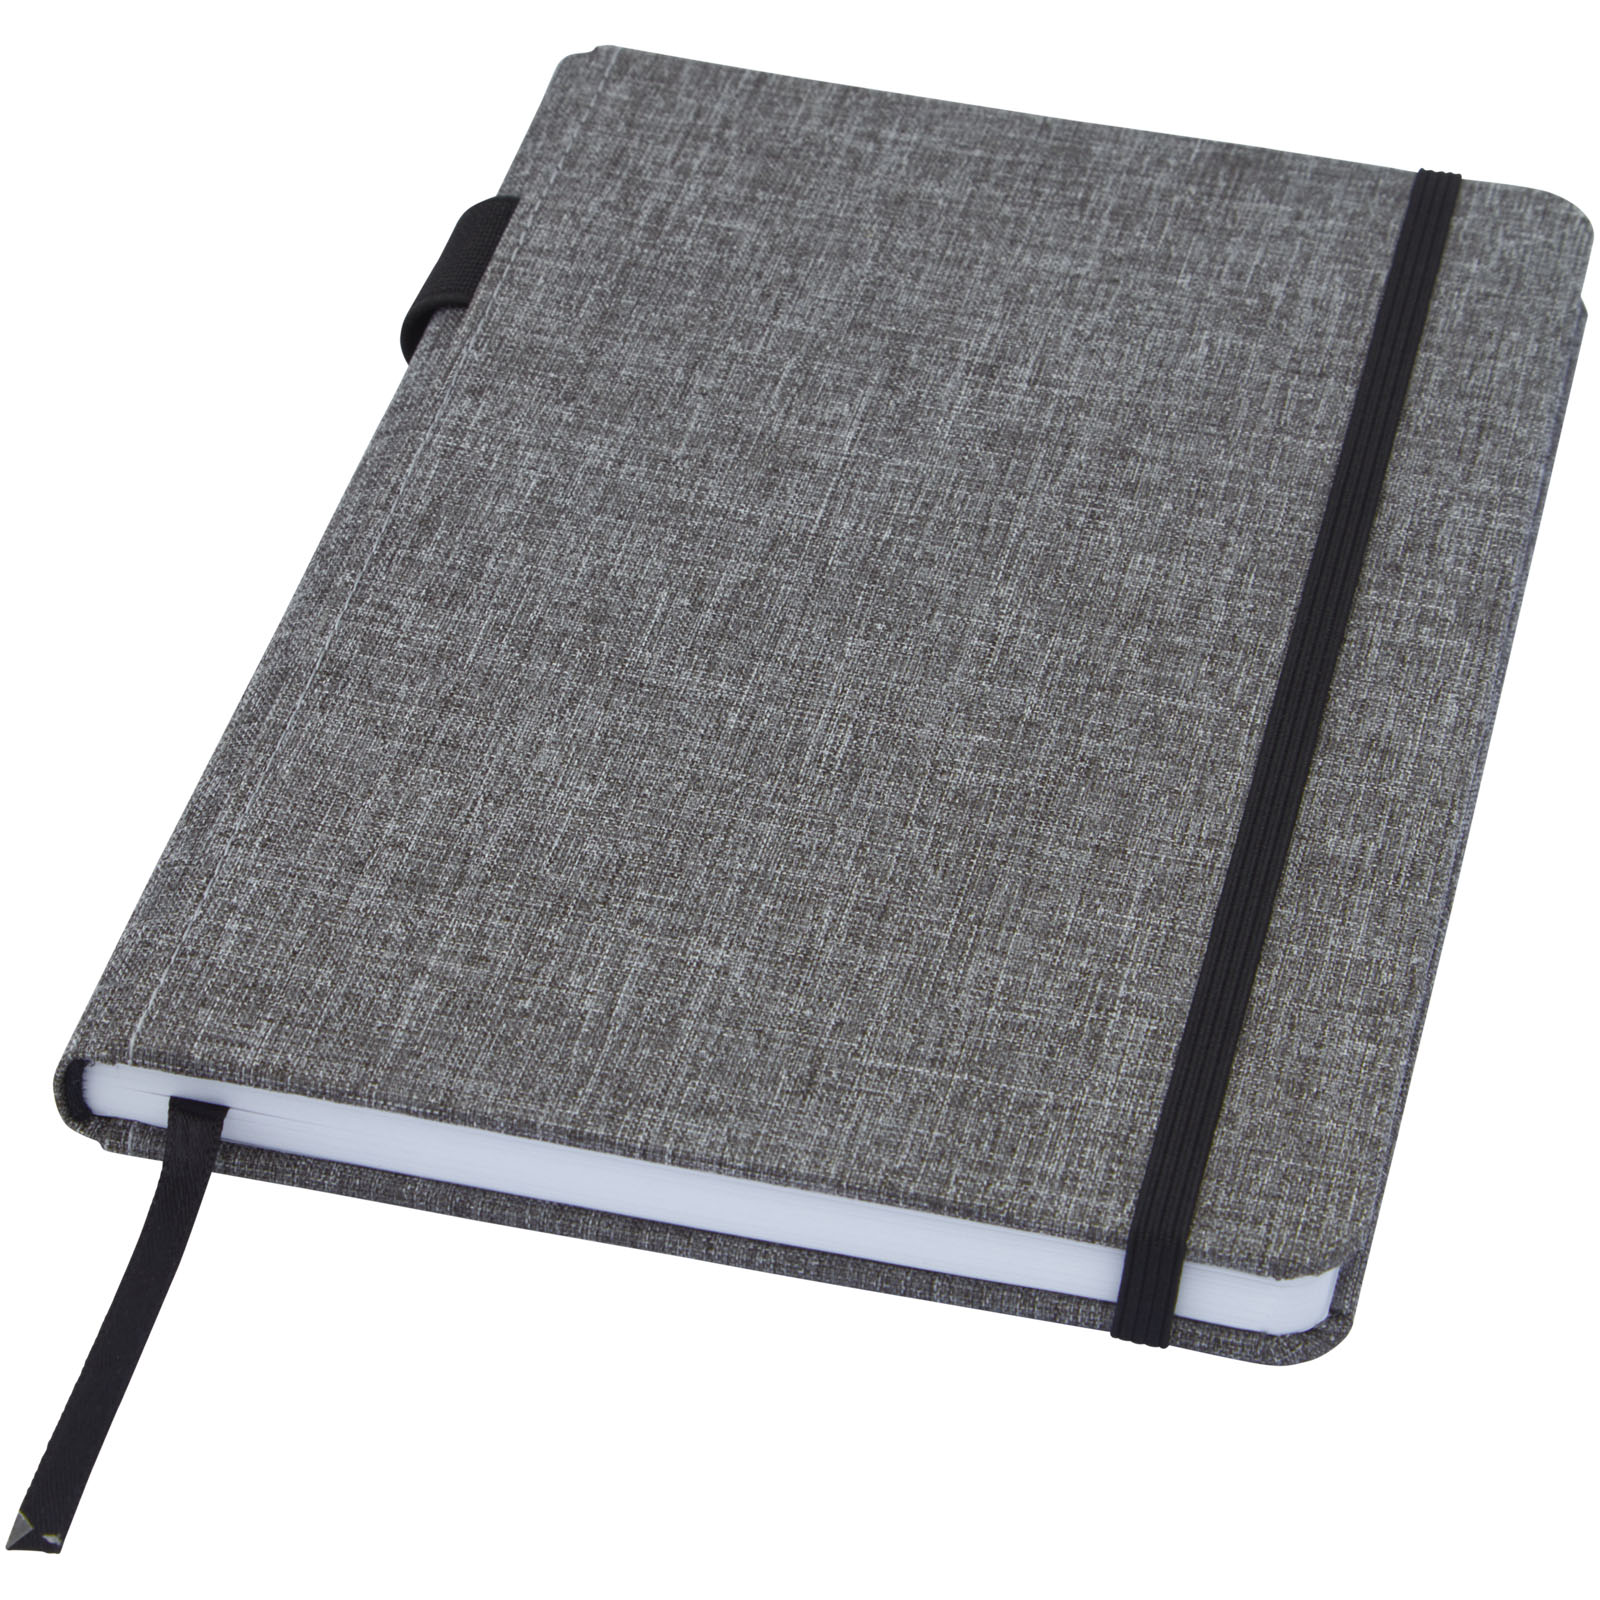 This is an A5 size notebook made from RPET fabric - Appleton Wiske - Crewe